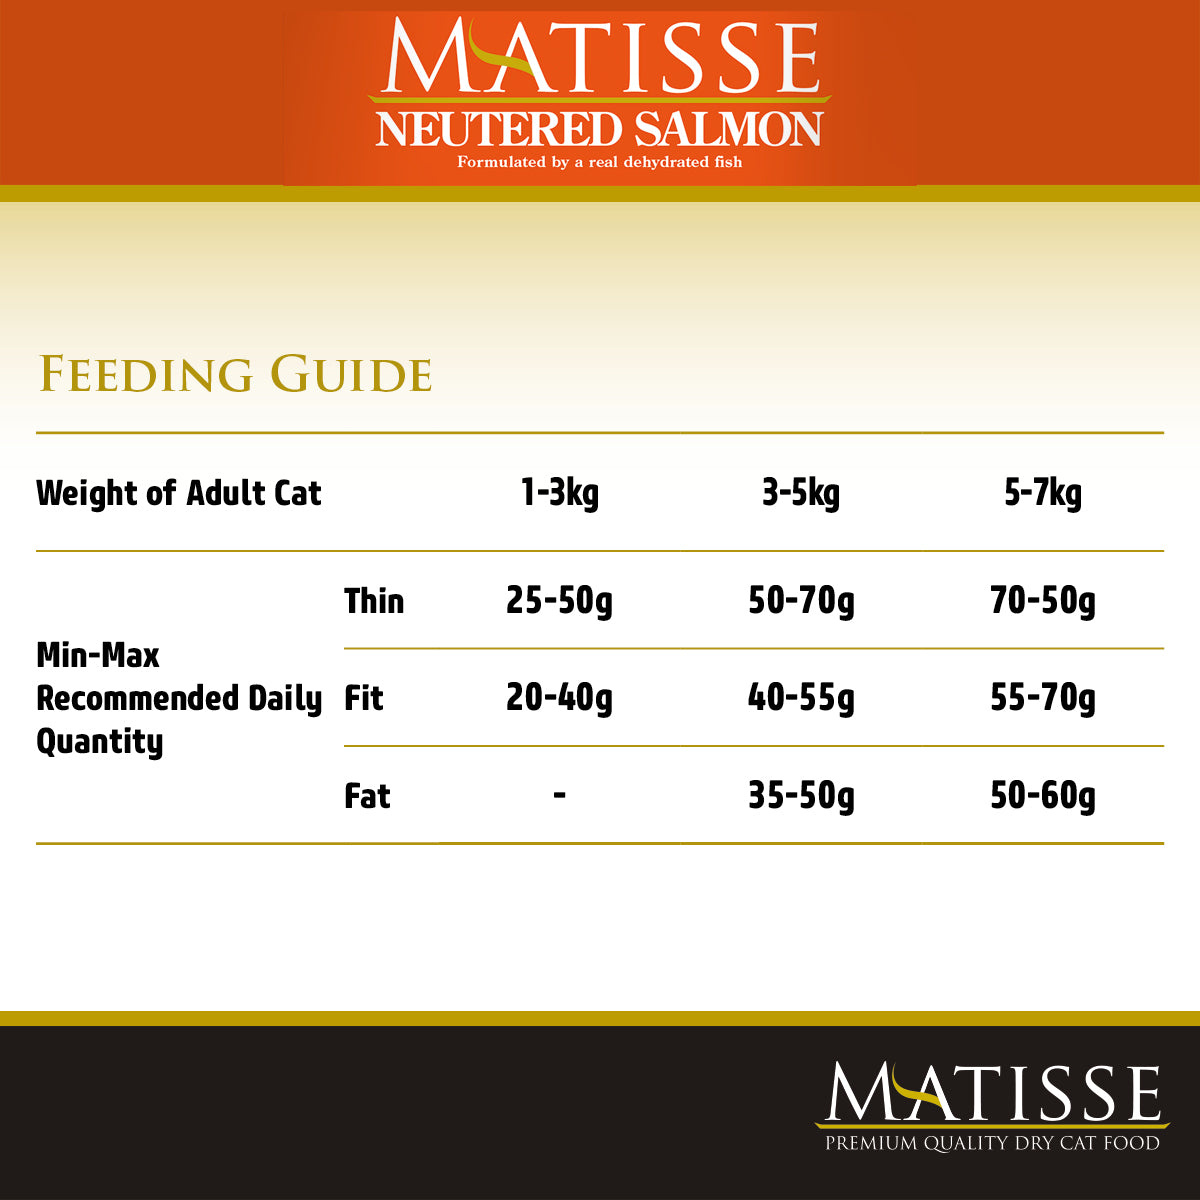 Matisse Premium Salmon Dry Cat Food for Neutered Cats - Heads Up For Tails